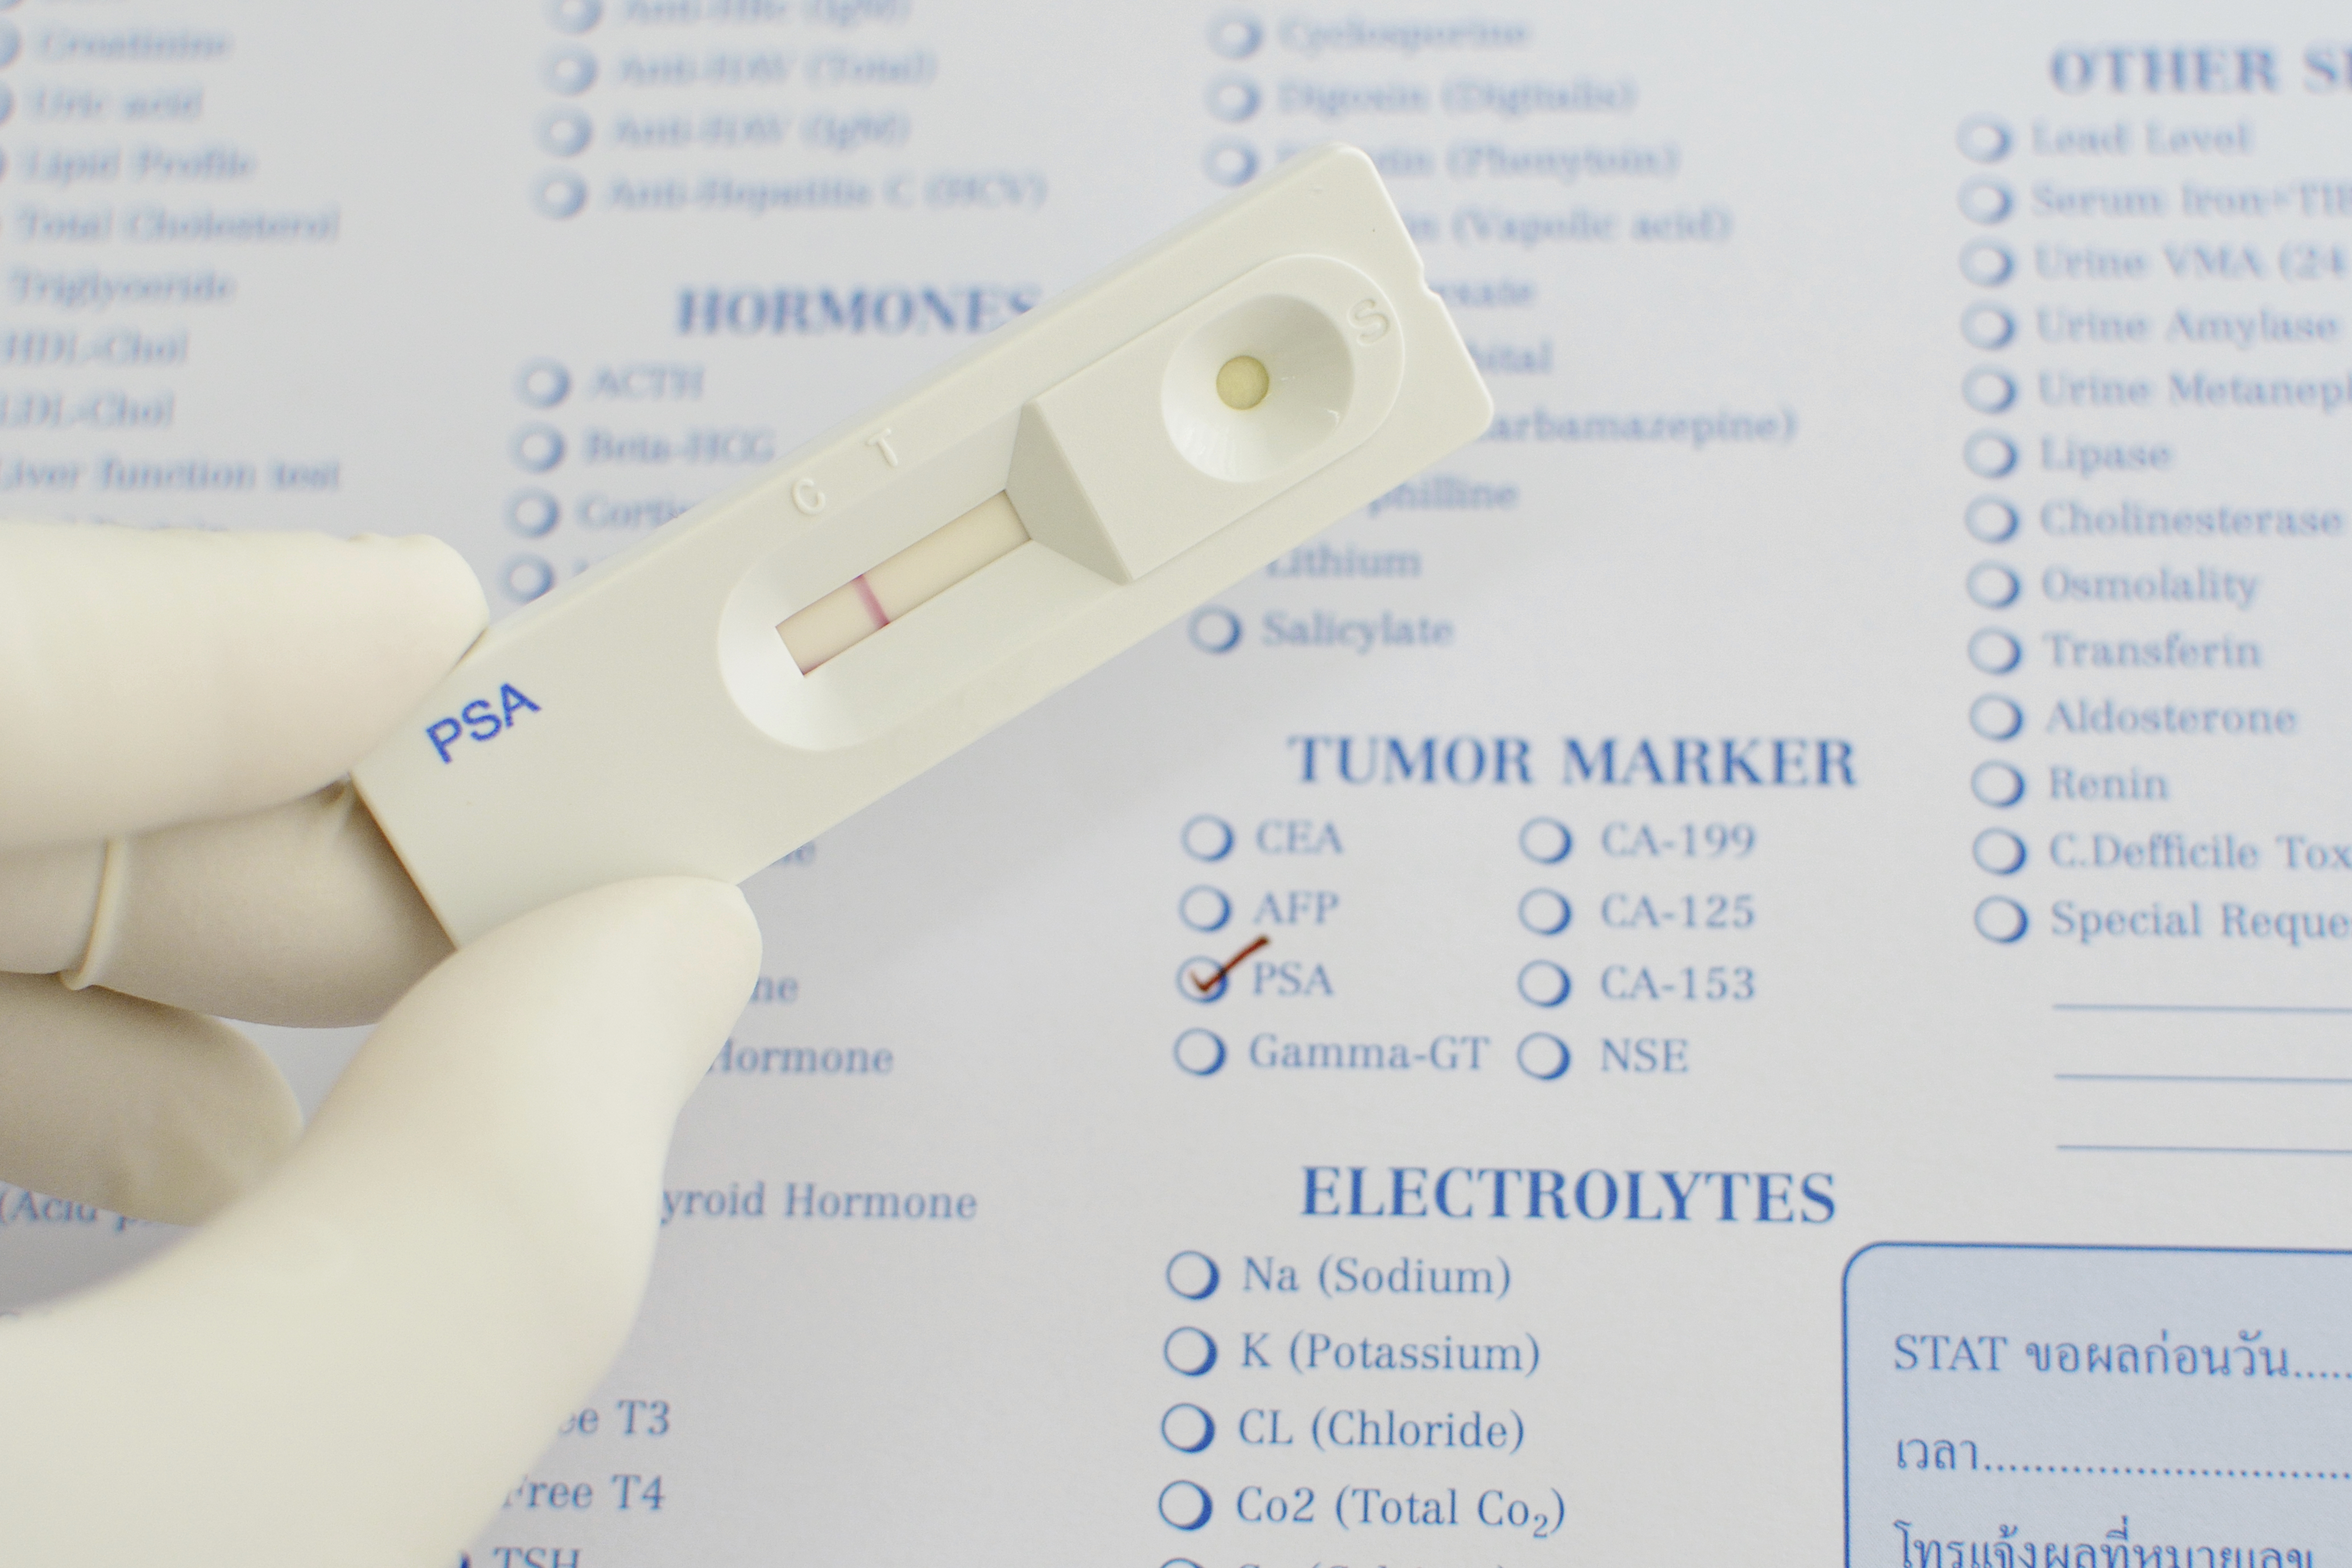 Screening for prostate cancer: What you should know about the PSA test